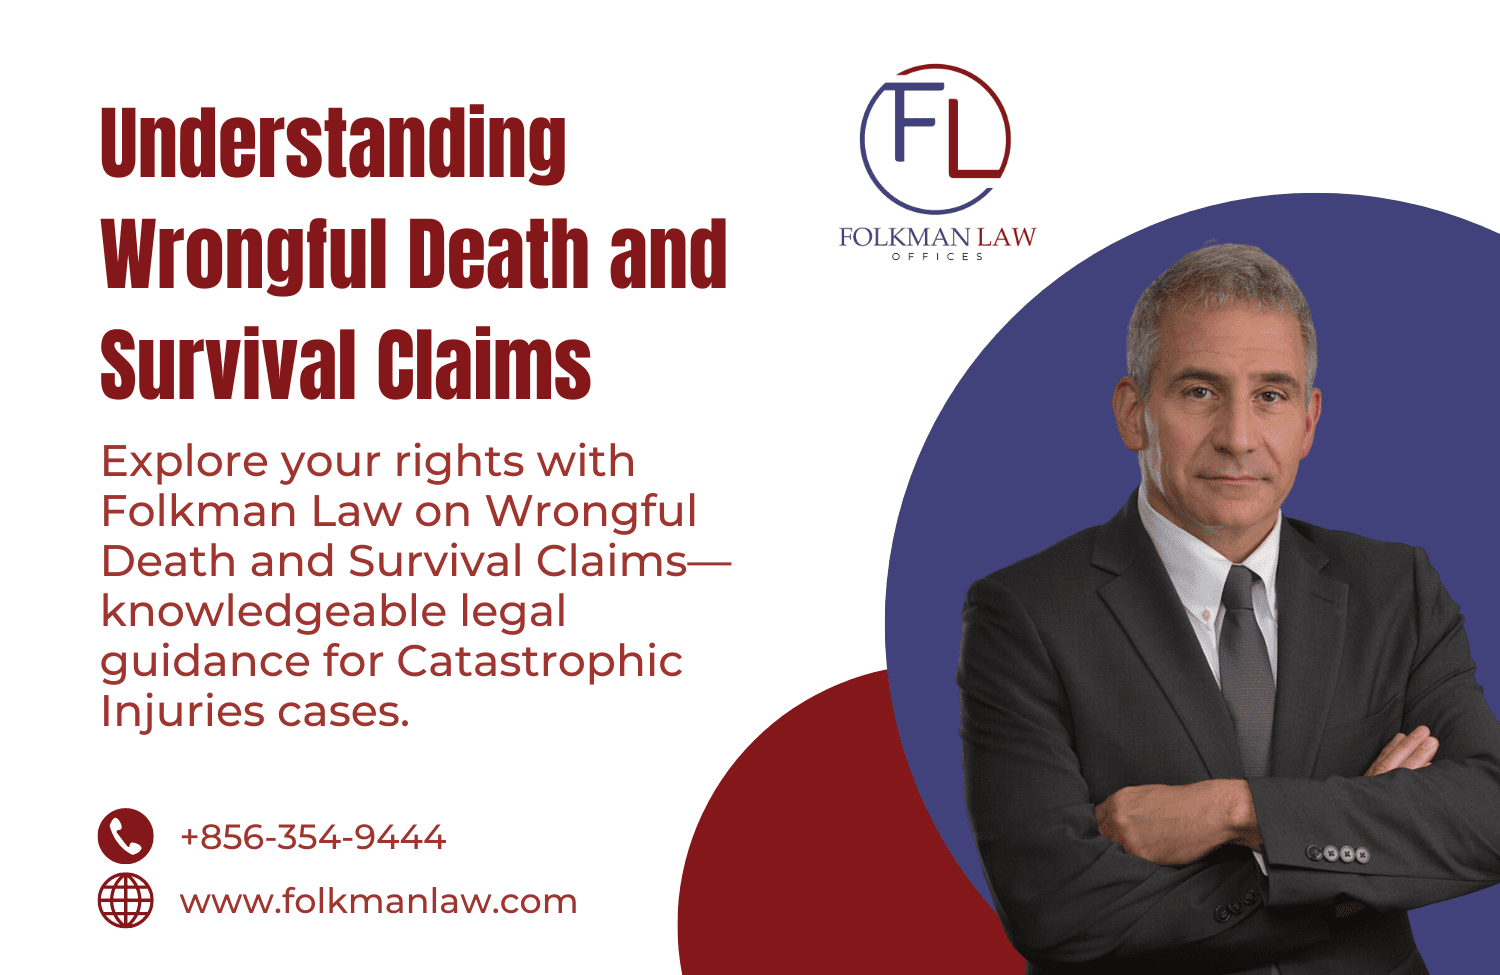 Understangding Wrongful Death and Survival Claims